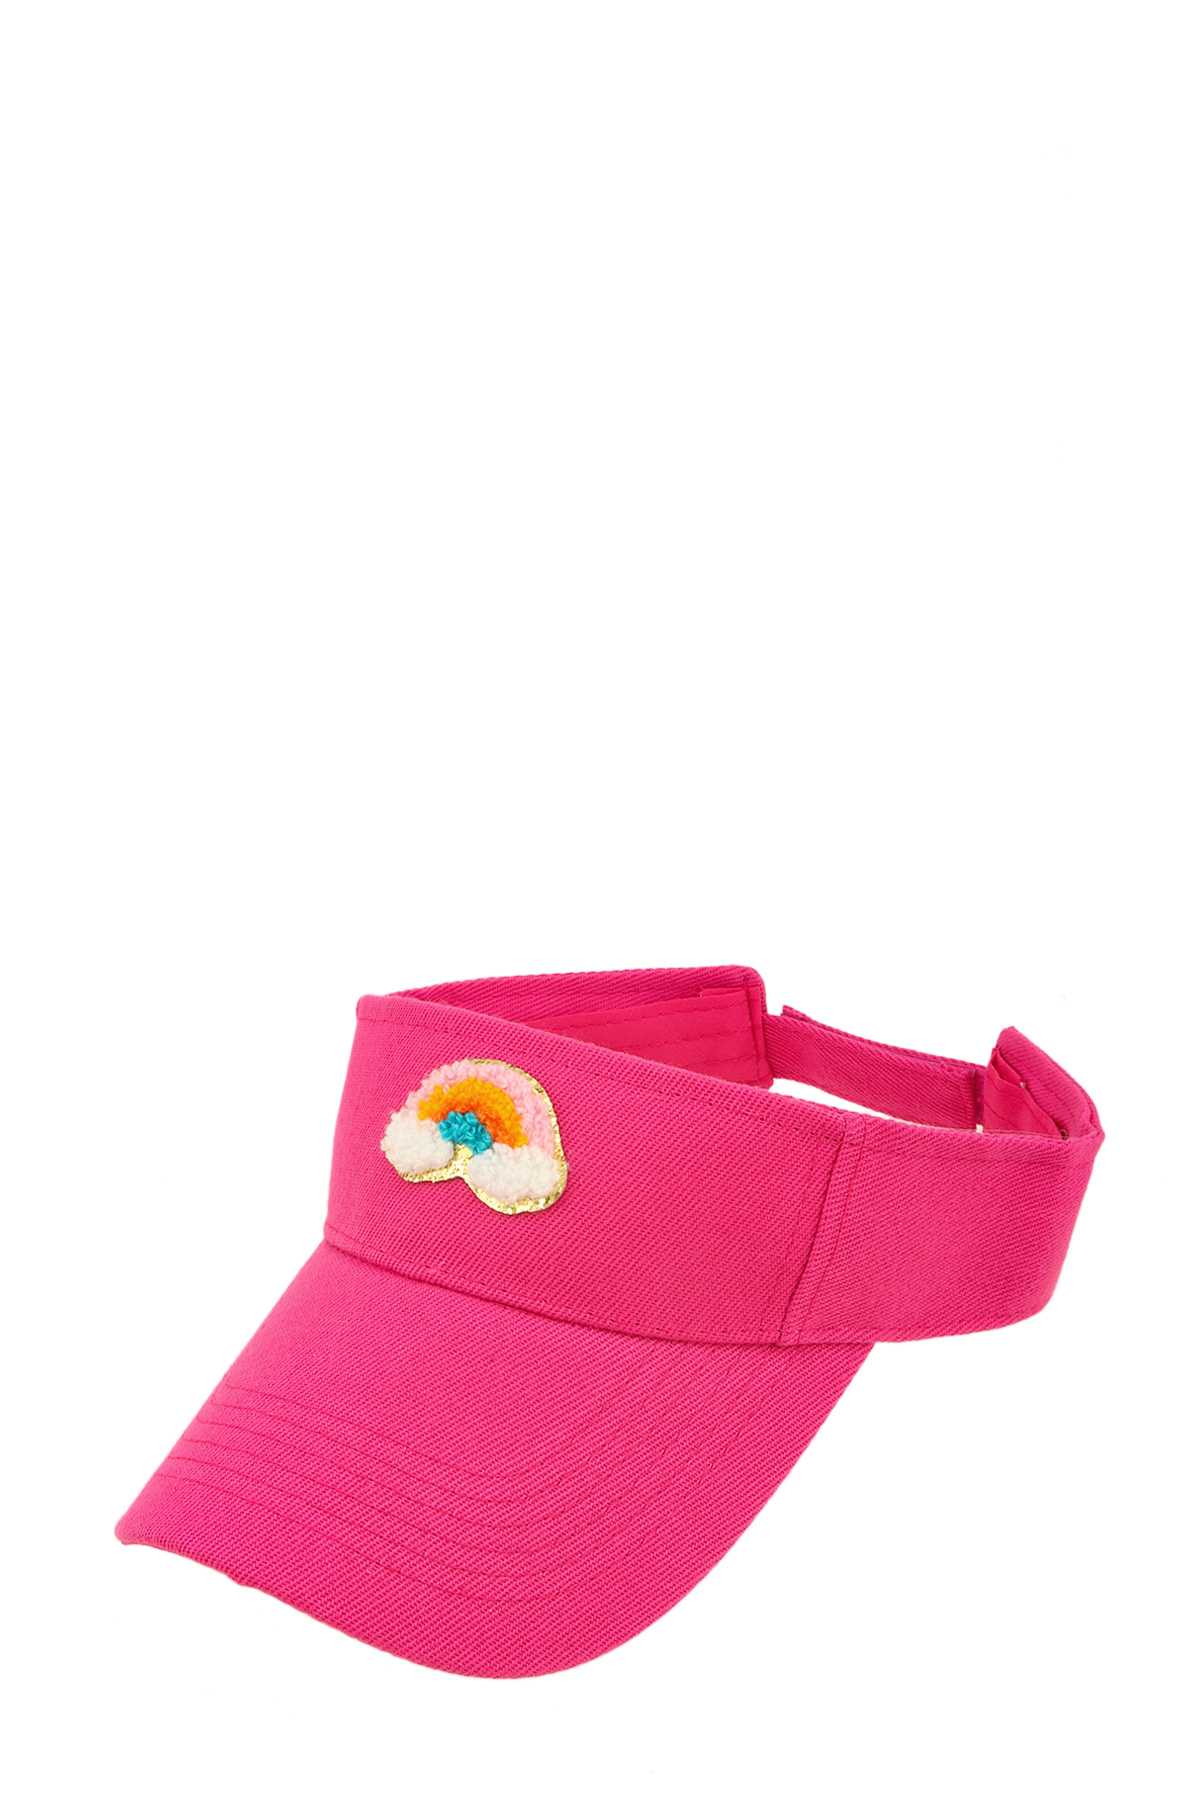 Rainbow and Cloud Accent Visor Hat